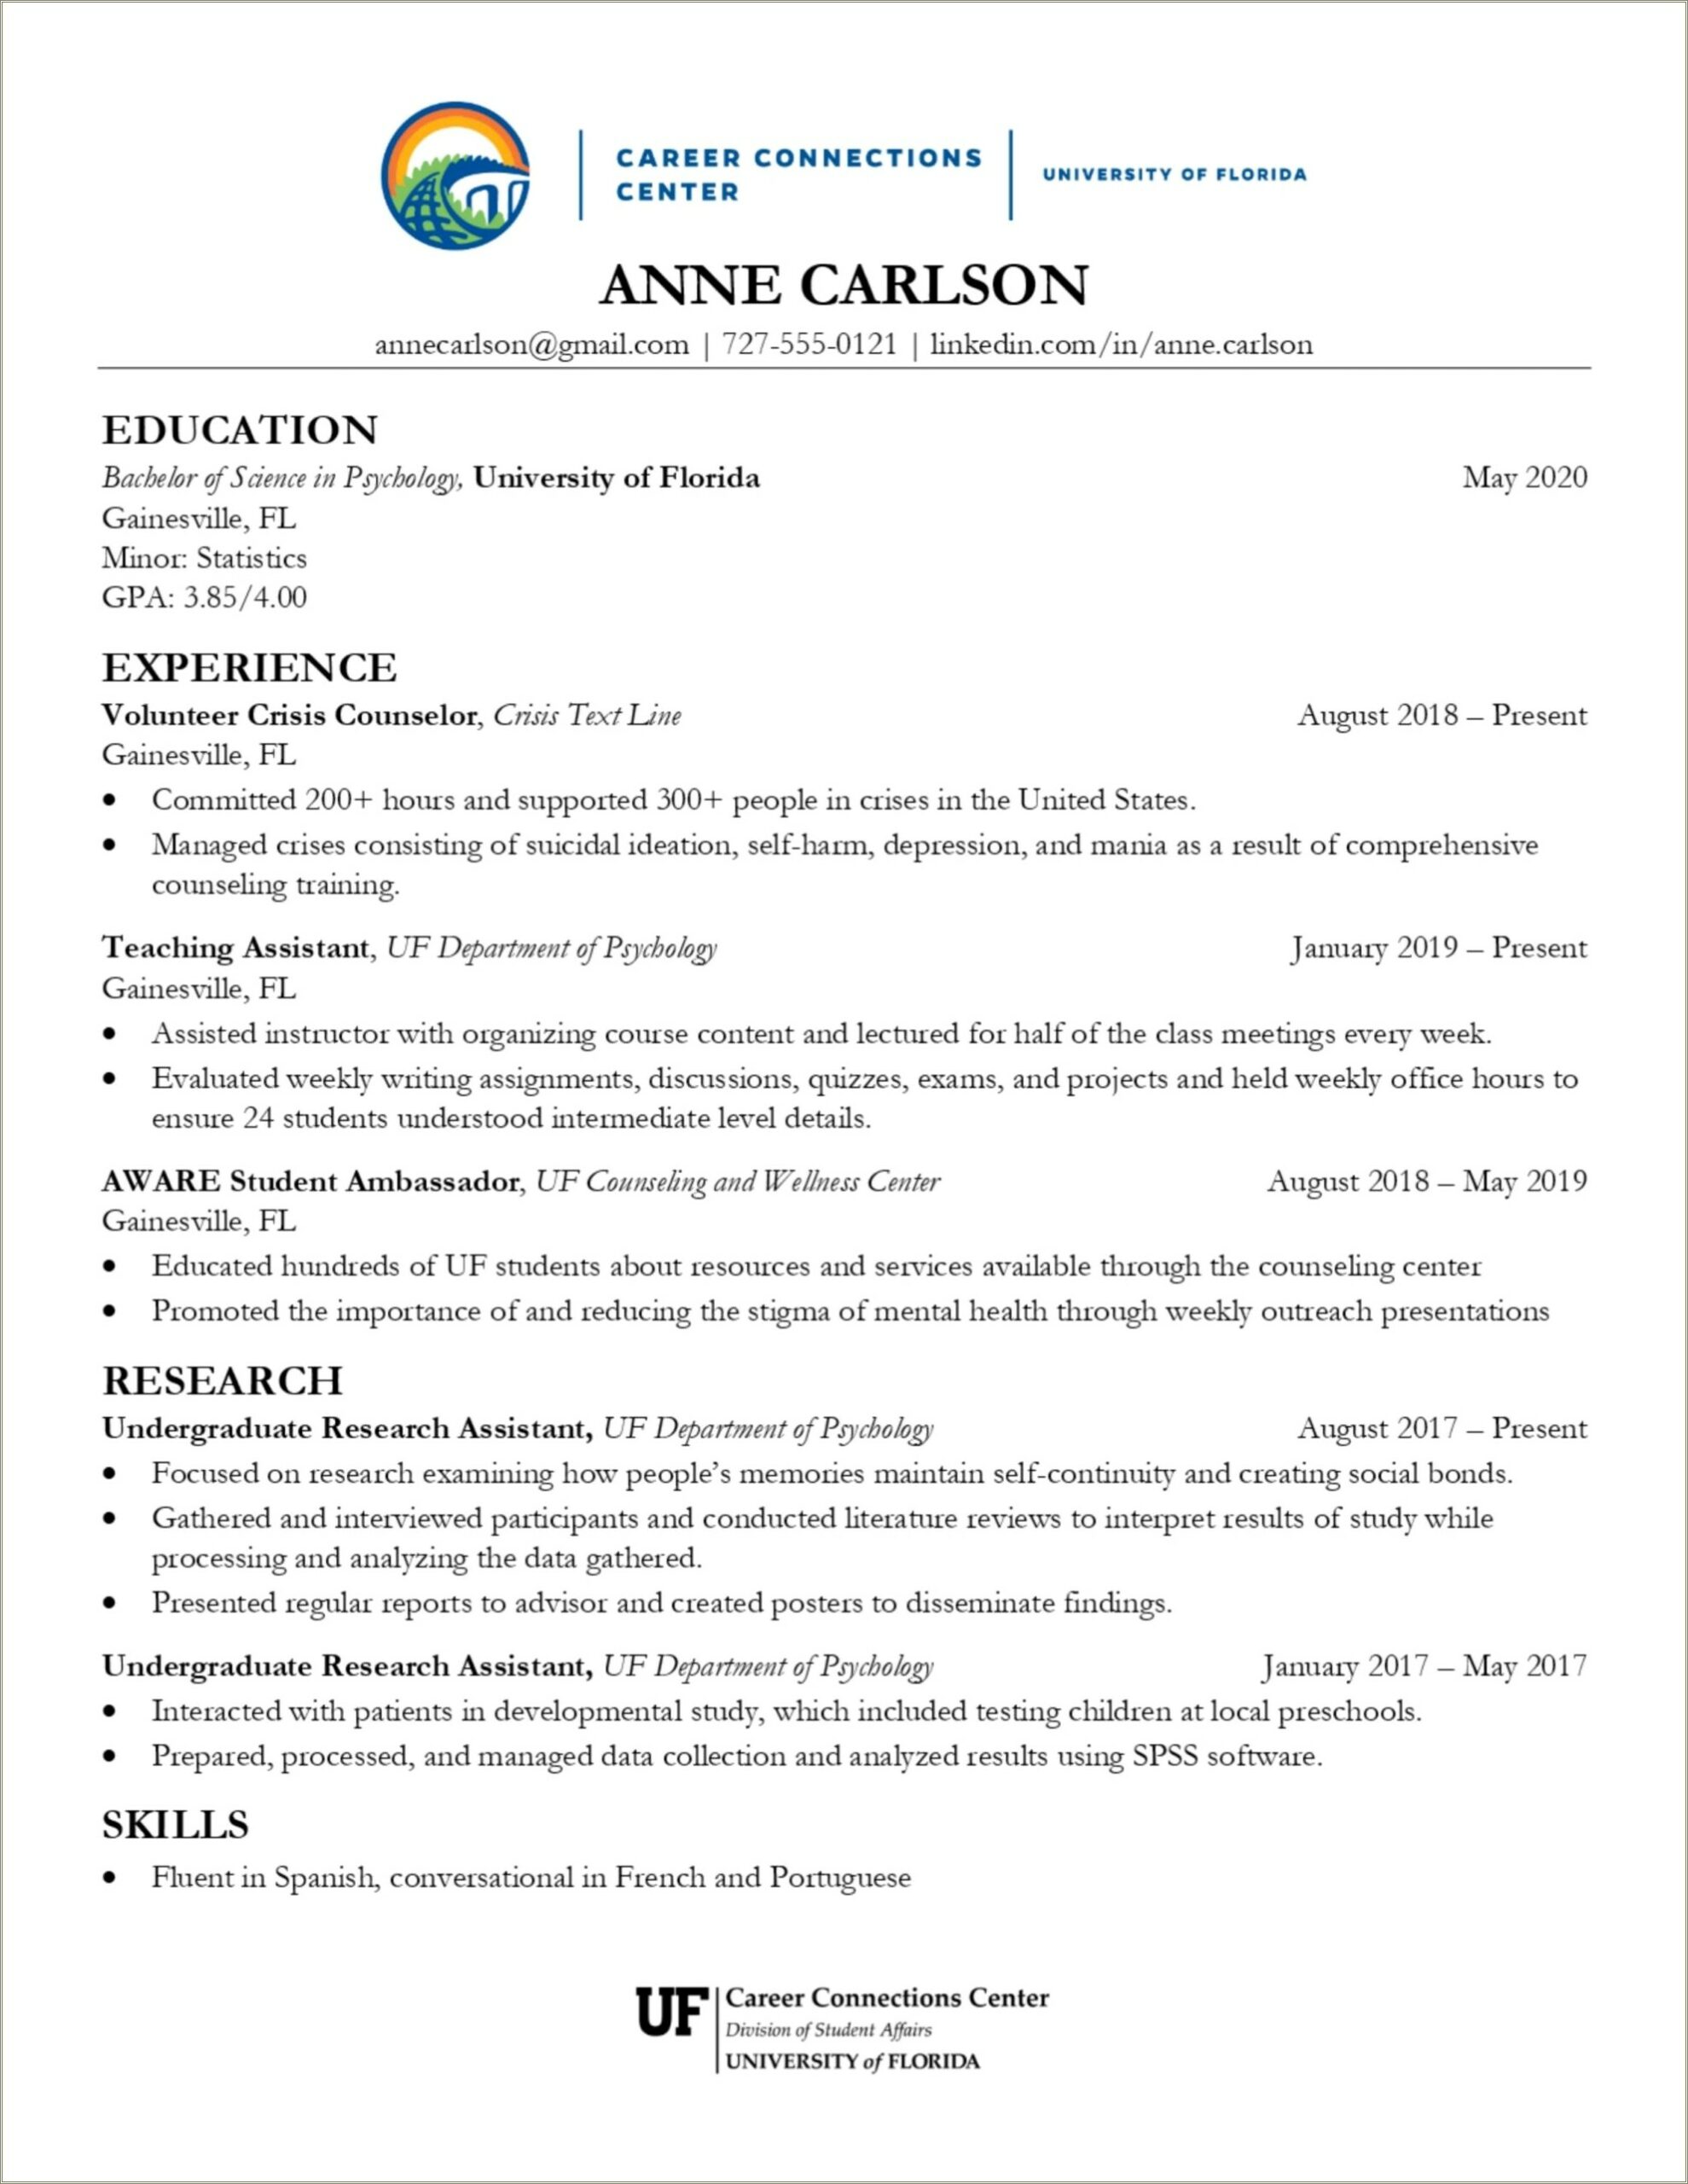 Objective For Resume For Residential Counselor